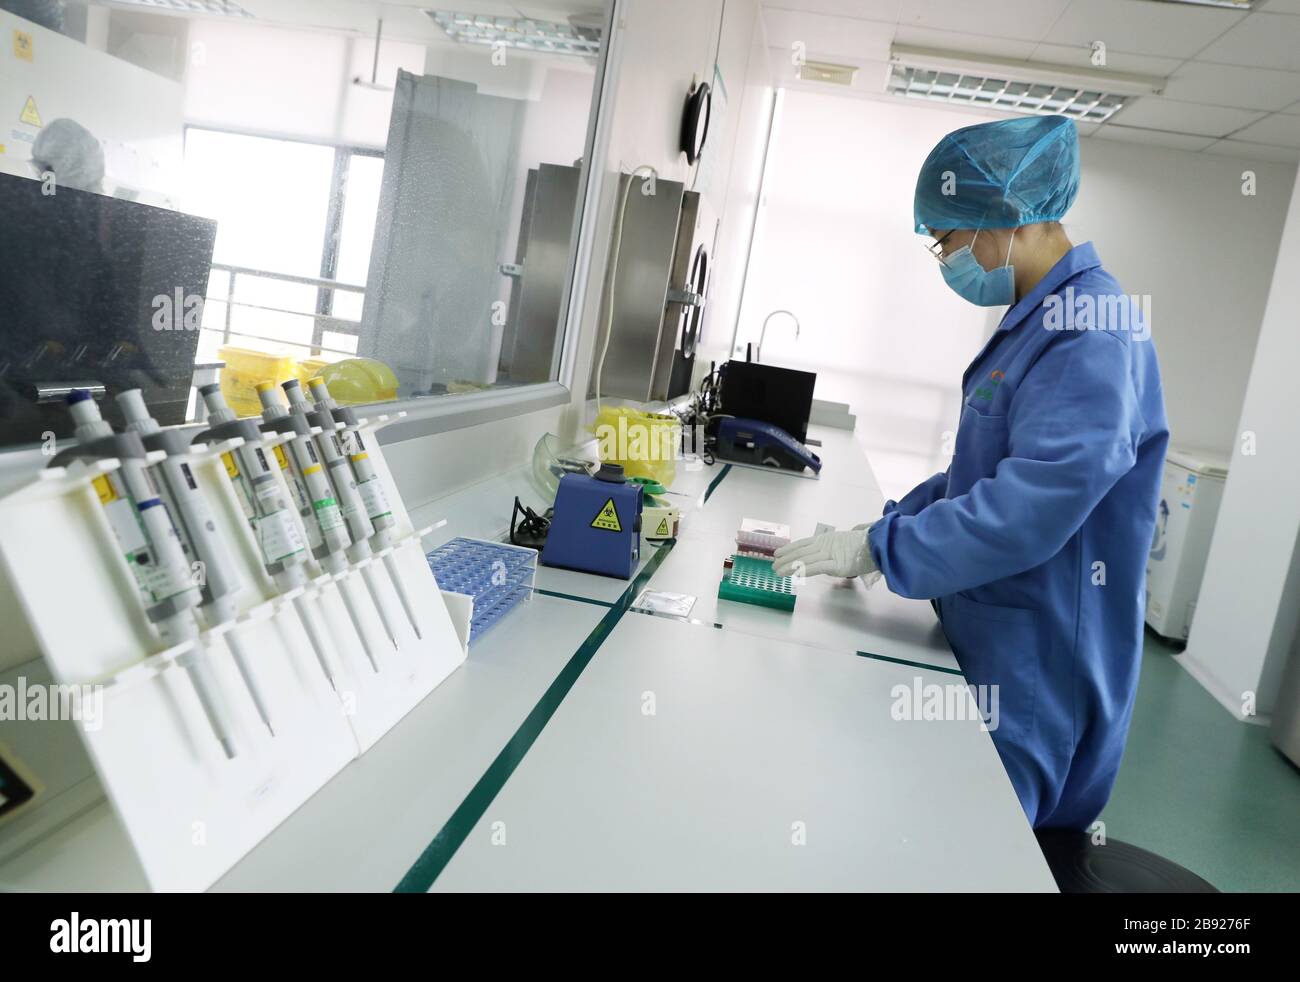 Shanghai, China. 23rd Mar, 2020. A staff prepares the testing reagent in Shanghai KingMed Diagnostics in Shanghai, east China, March 23, 2020. Shanghai ordered people arriving in the city from other countries to undergo nucleic acid testing (NAT) to screen for coronavirus from Monday, local authorities said. The new measure will expand a program that previously only applied to those coming from 24 heavily-hit countries, no matter their nationality, according to the municipal government's press conference on Sunday. Credit: Liu Ying/Xinhua/Alamy Live News Stock Photo